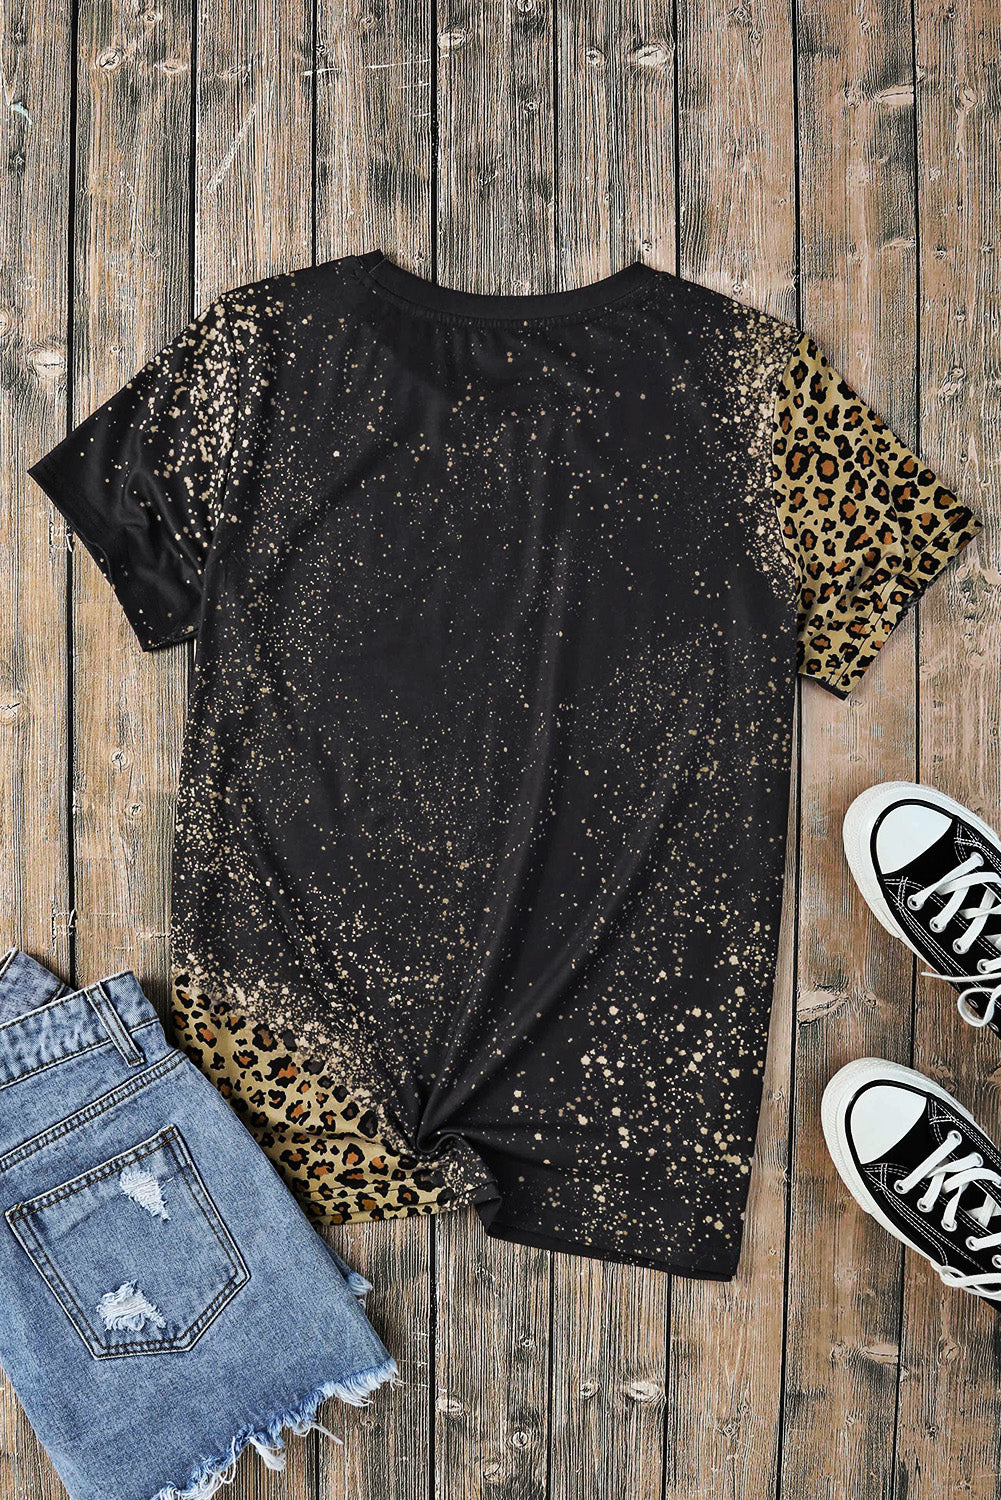 PLAY SOMETHING COUNTRY Graphic Leopard Tee